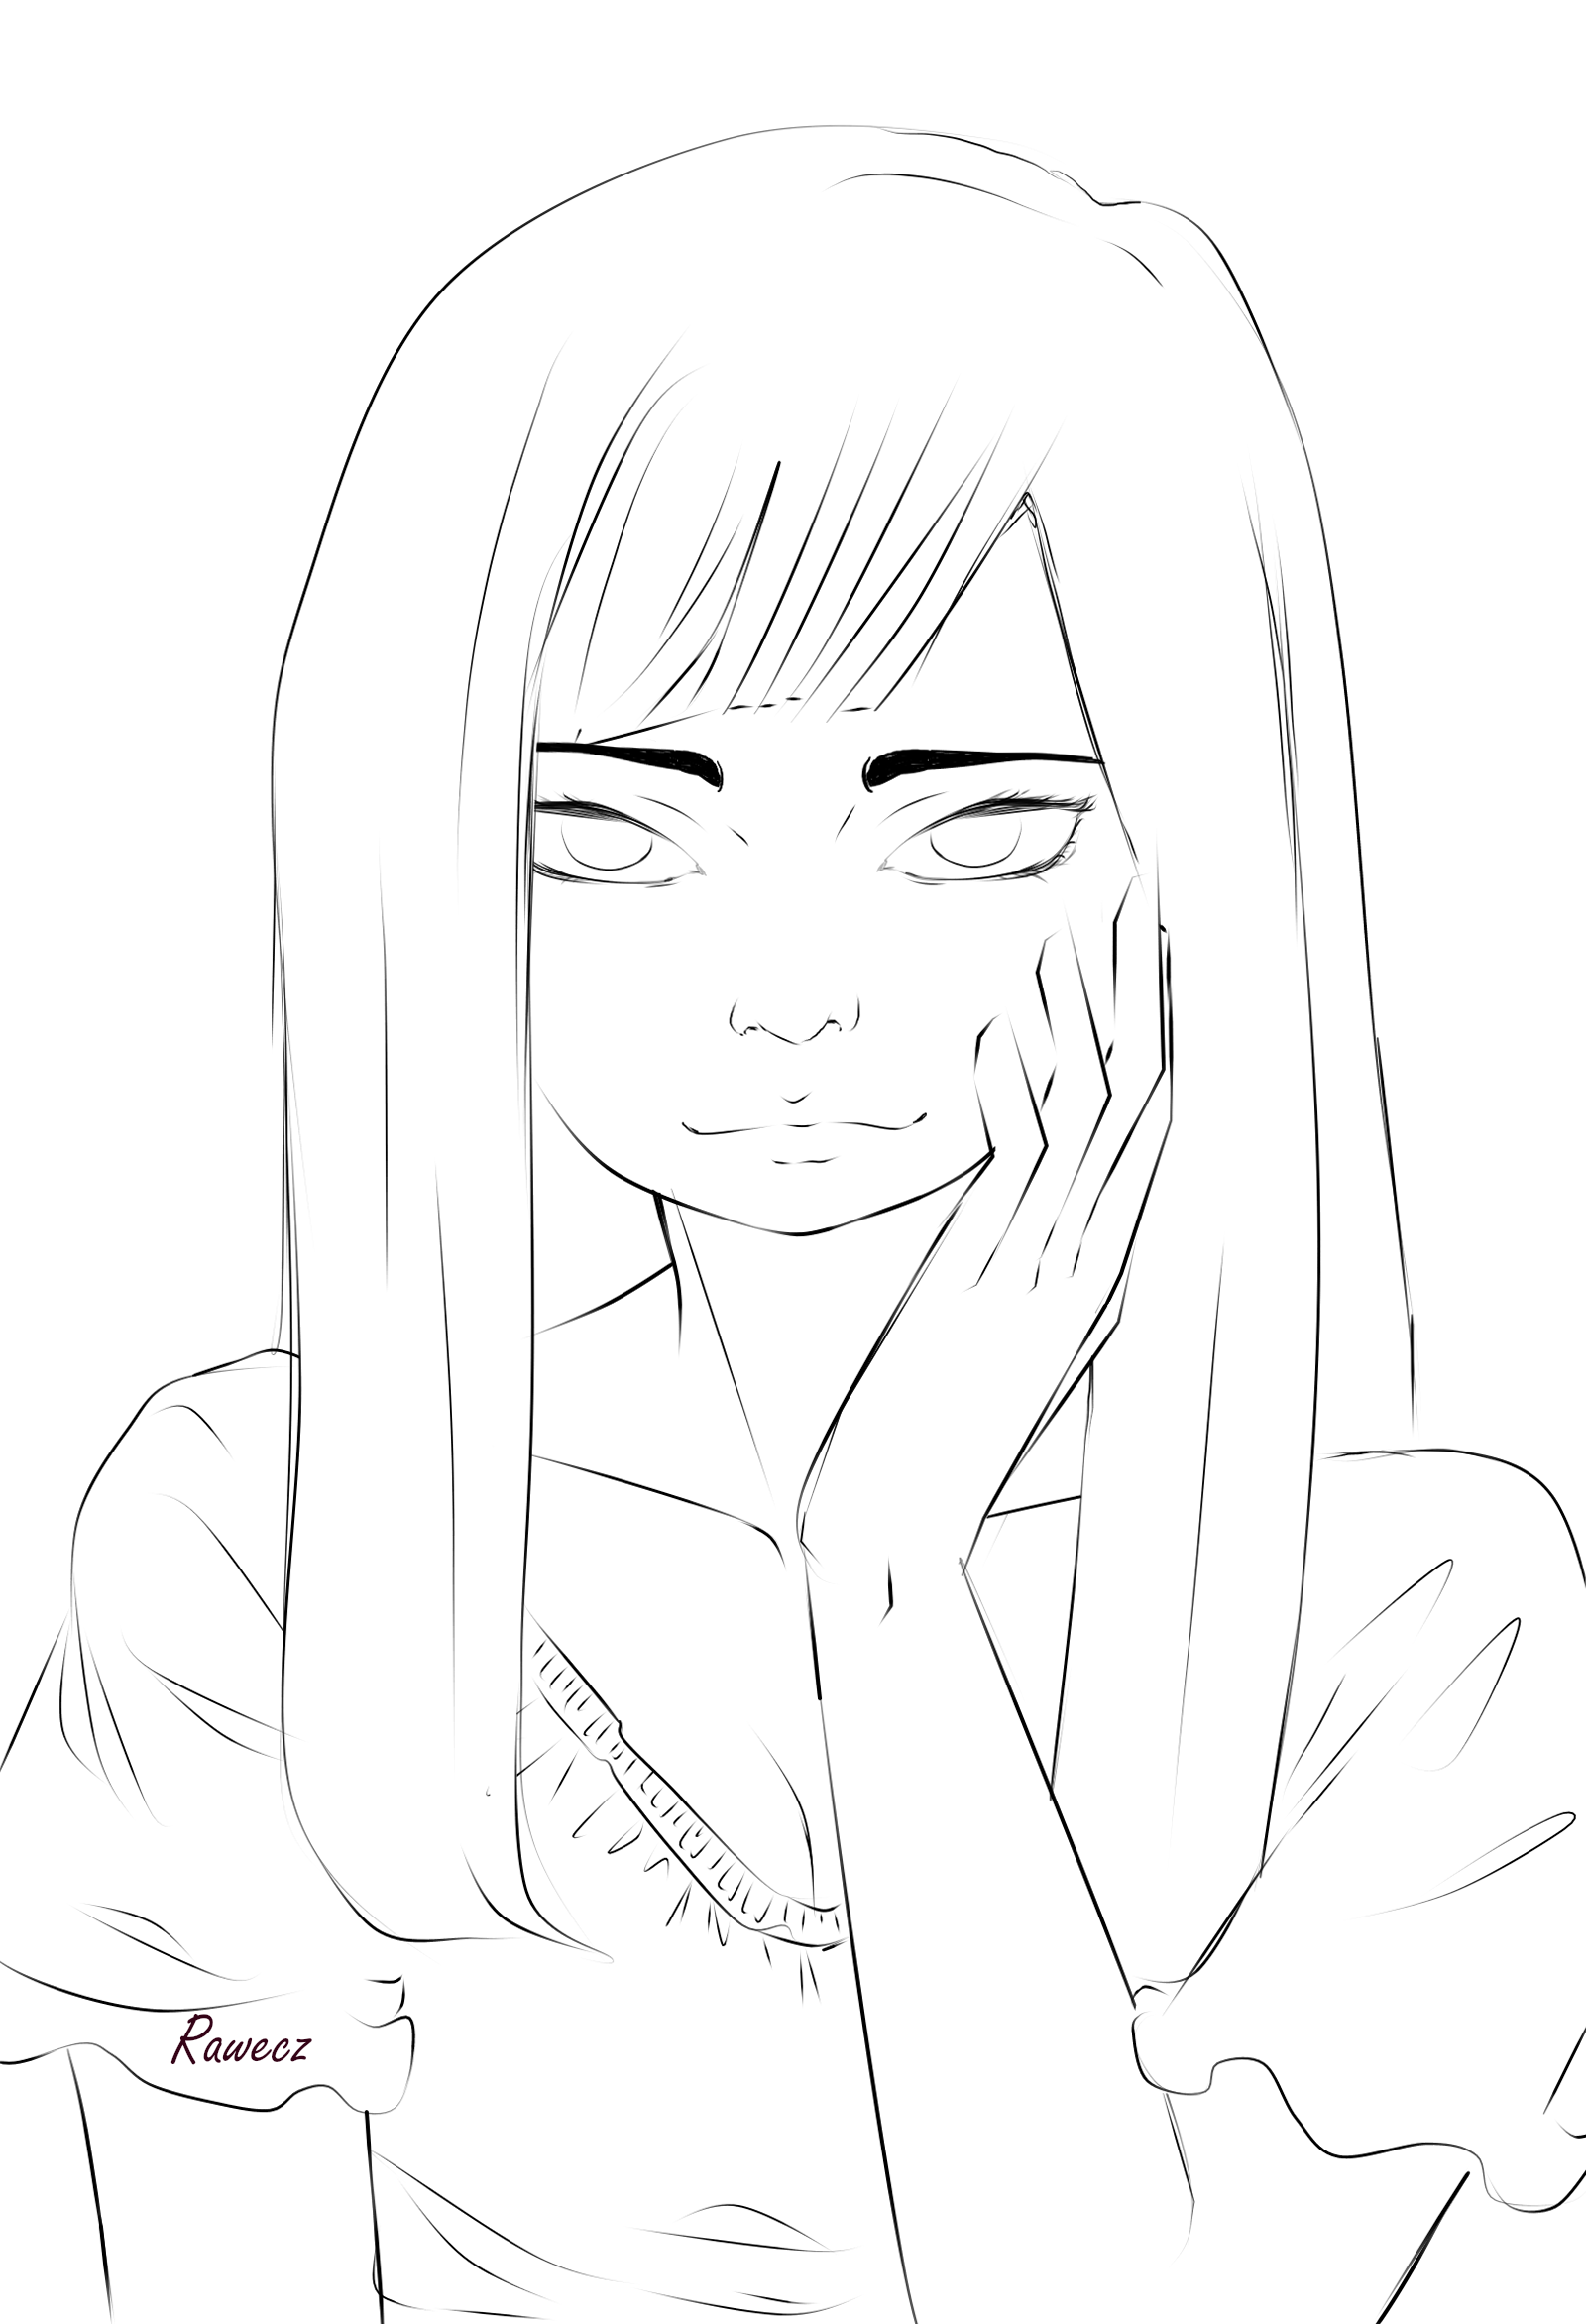 1 Lineart.png